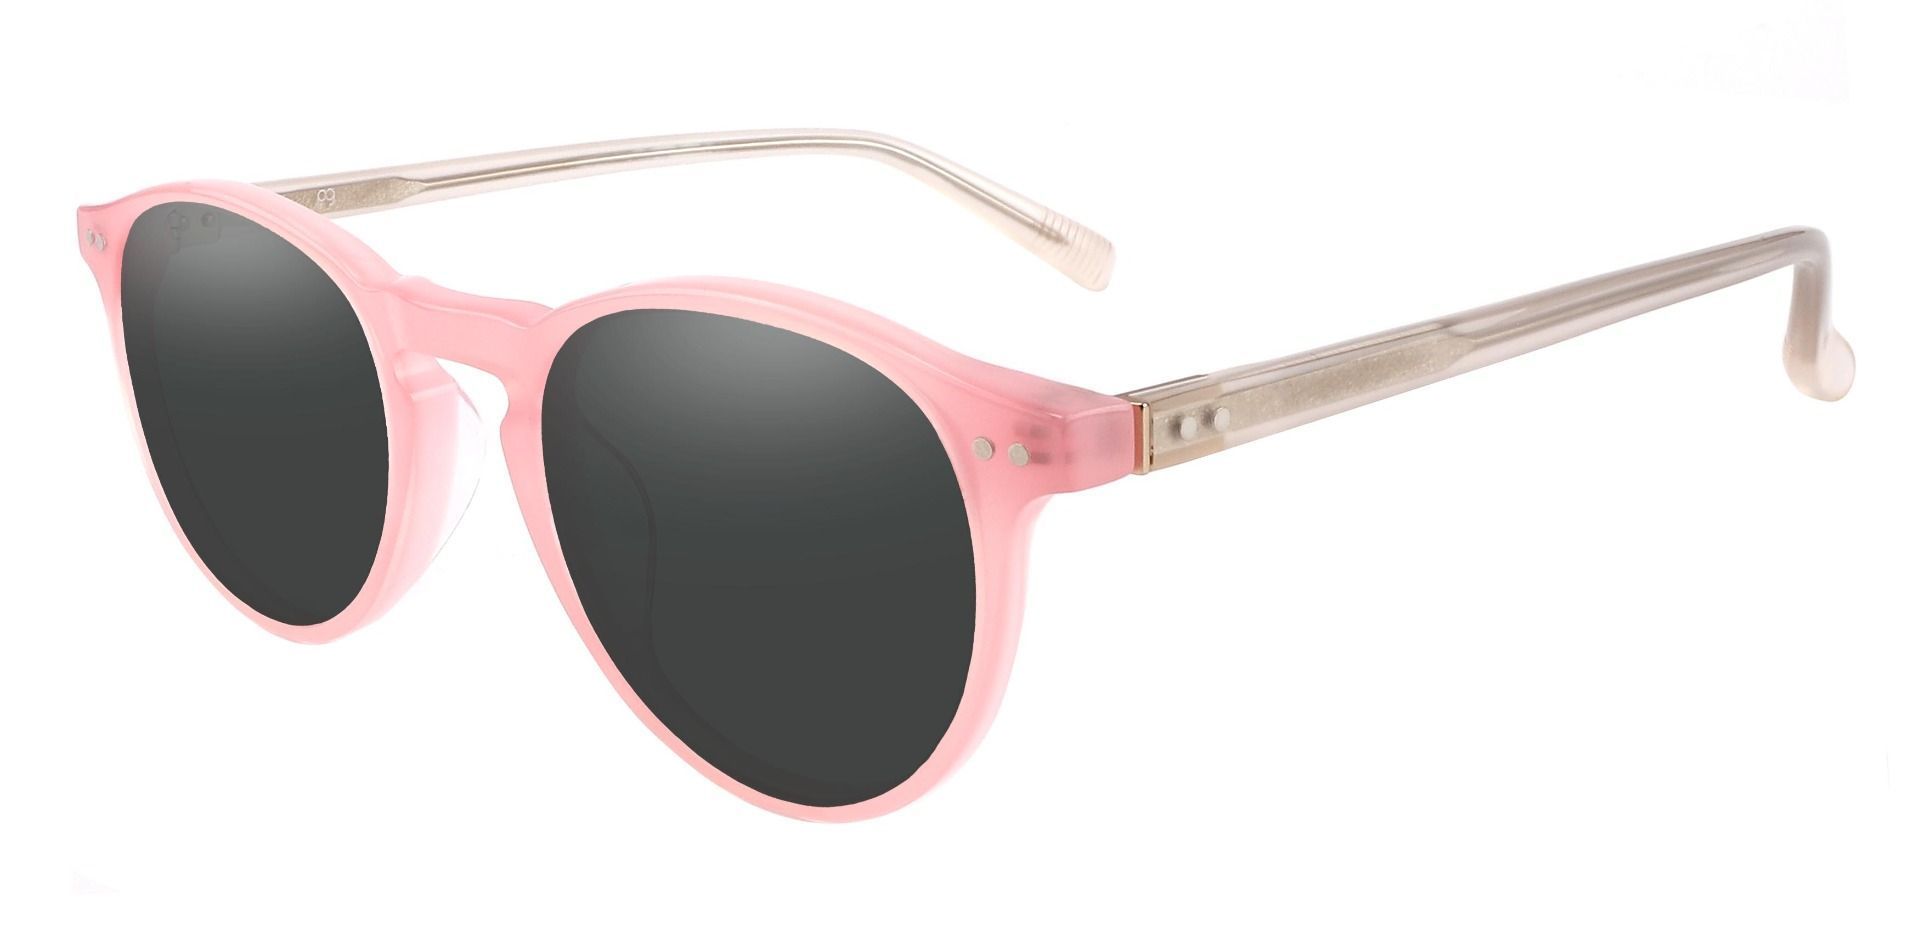 Monarch Oval Reading Sunglasses - Pink Frame With Gray Lenses